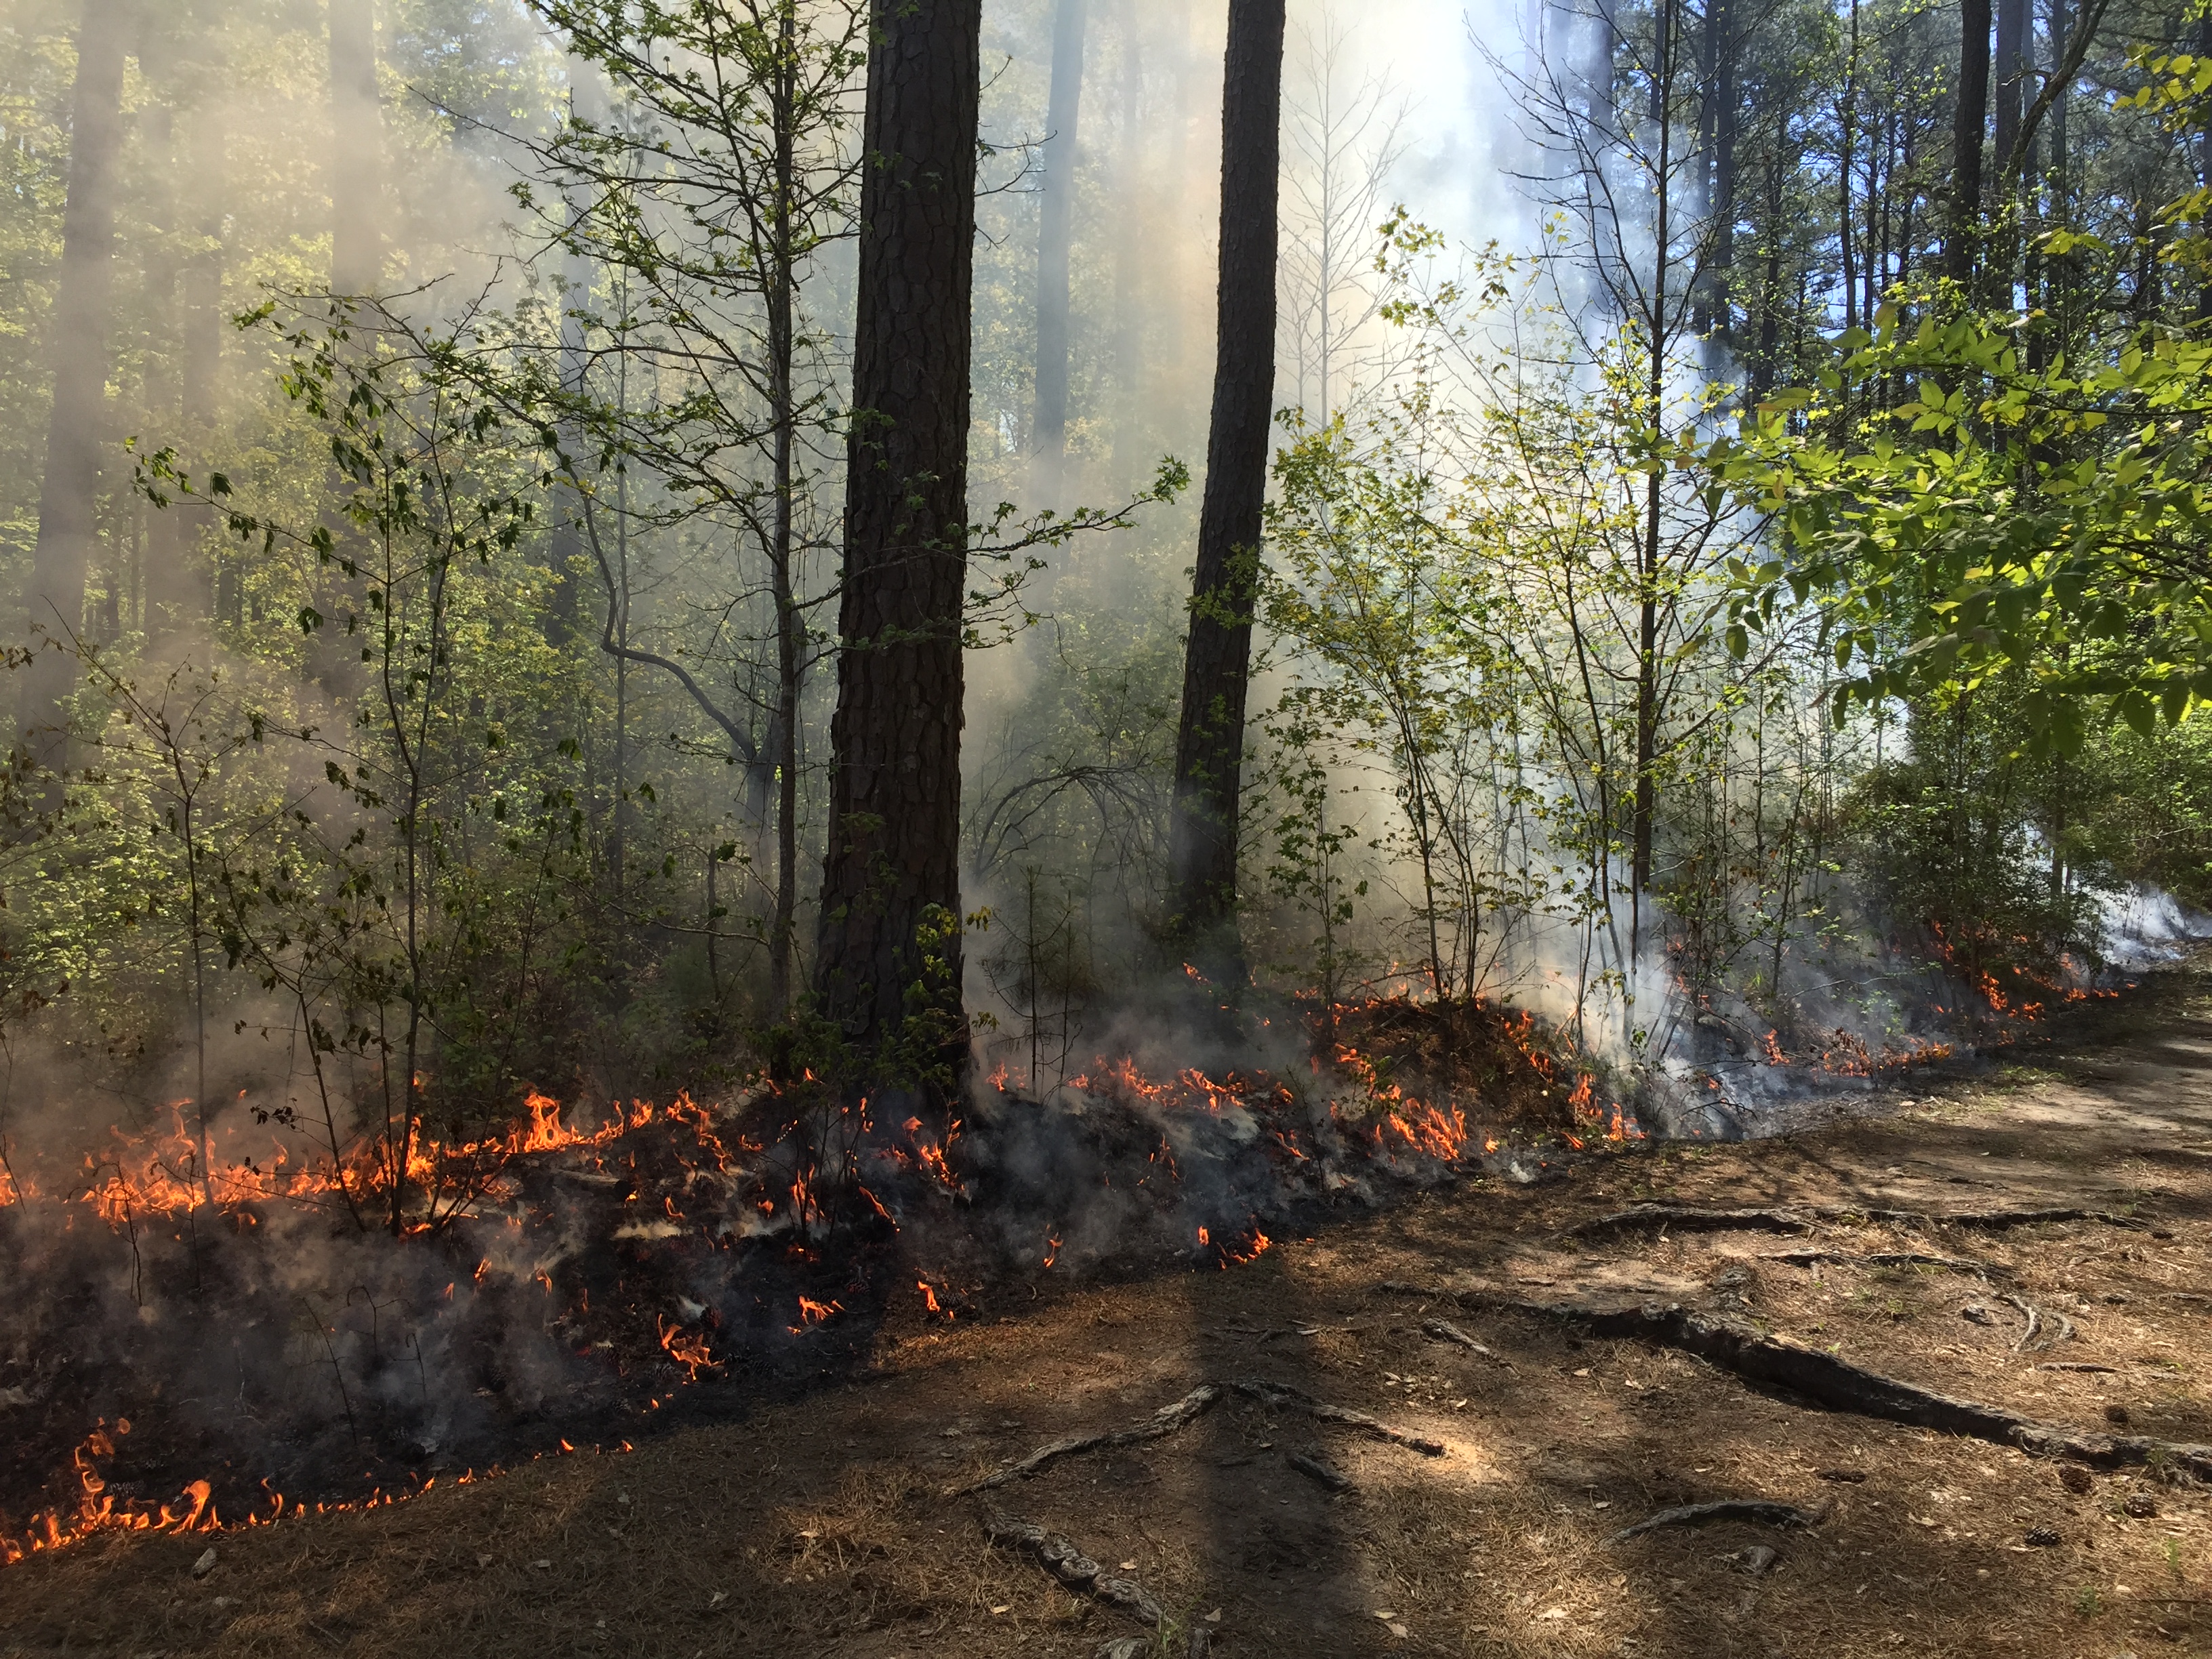 A forested landscape undergoing a prescribed fire